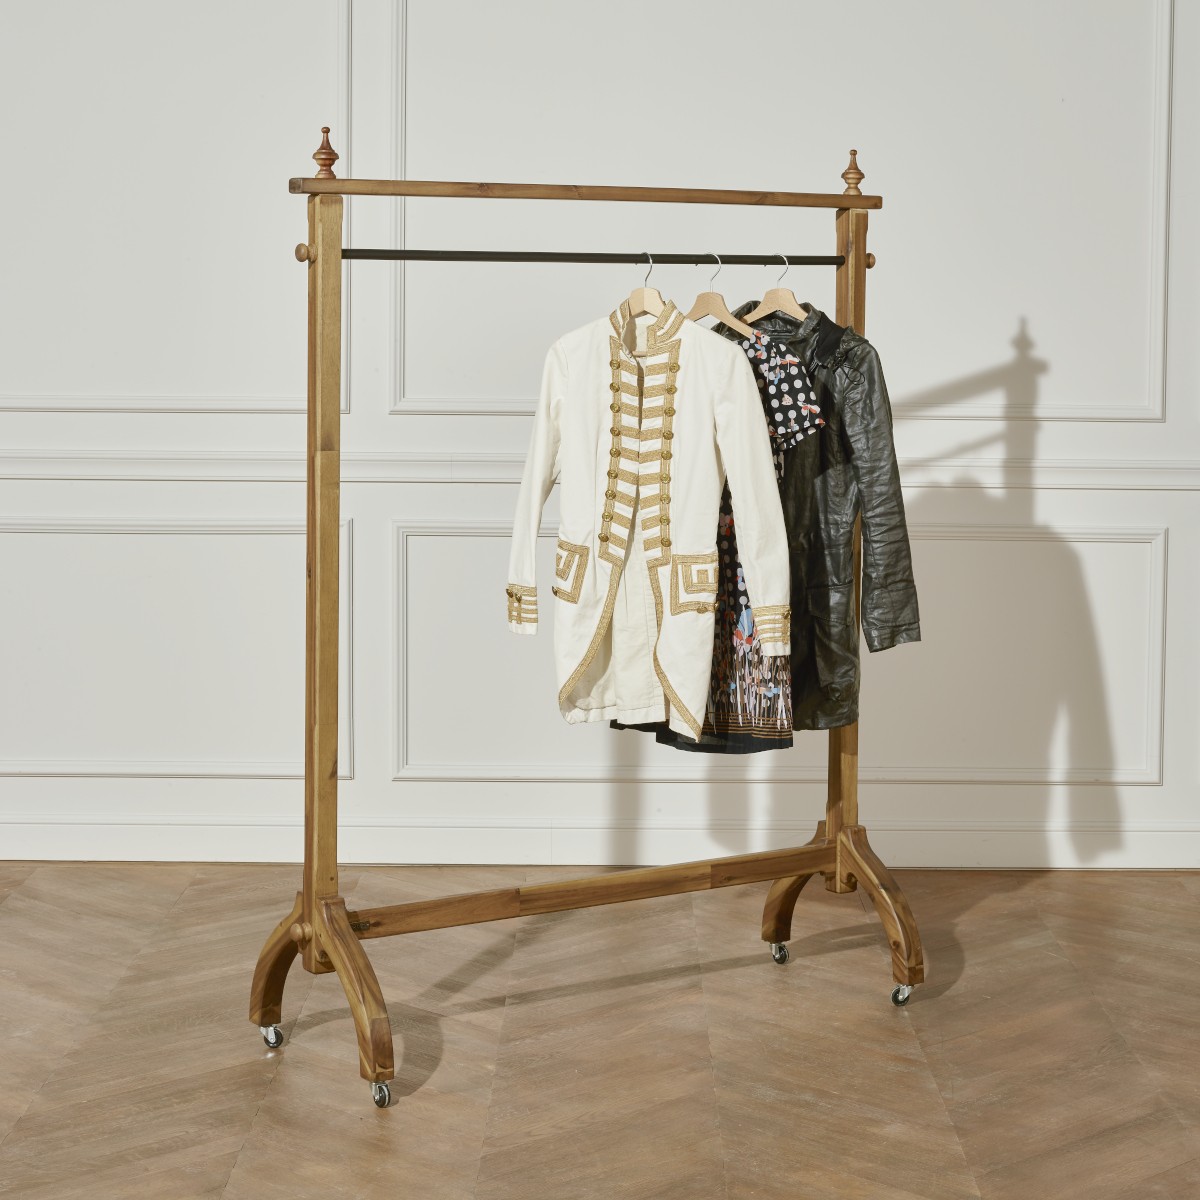 LULU clothes stand / free standing clothes rail - wooden & metal